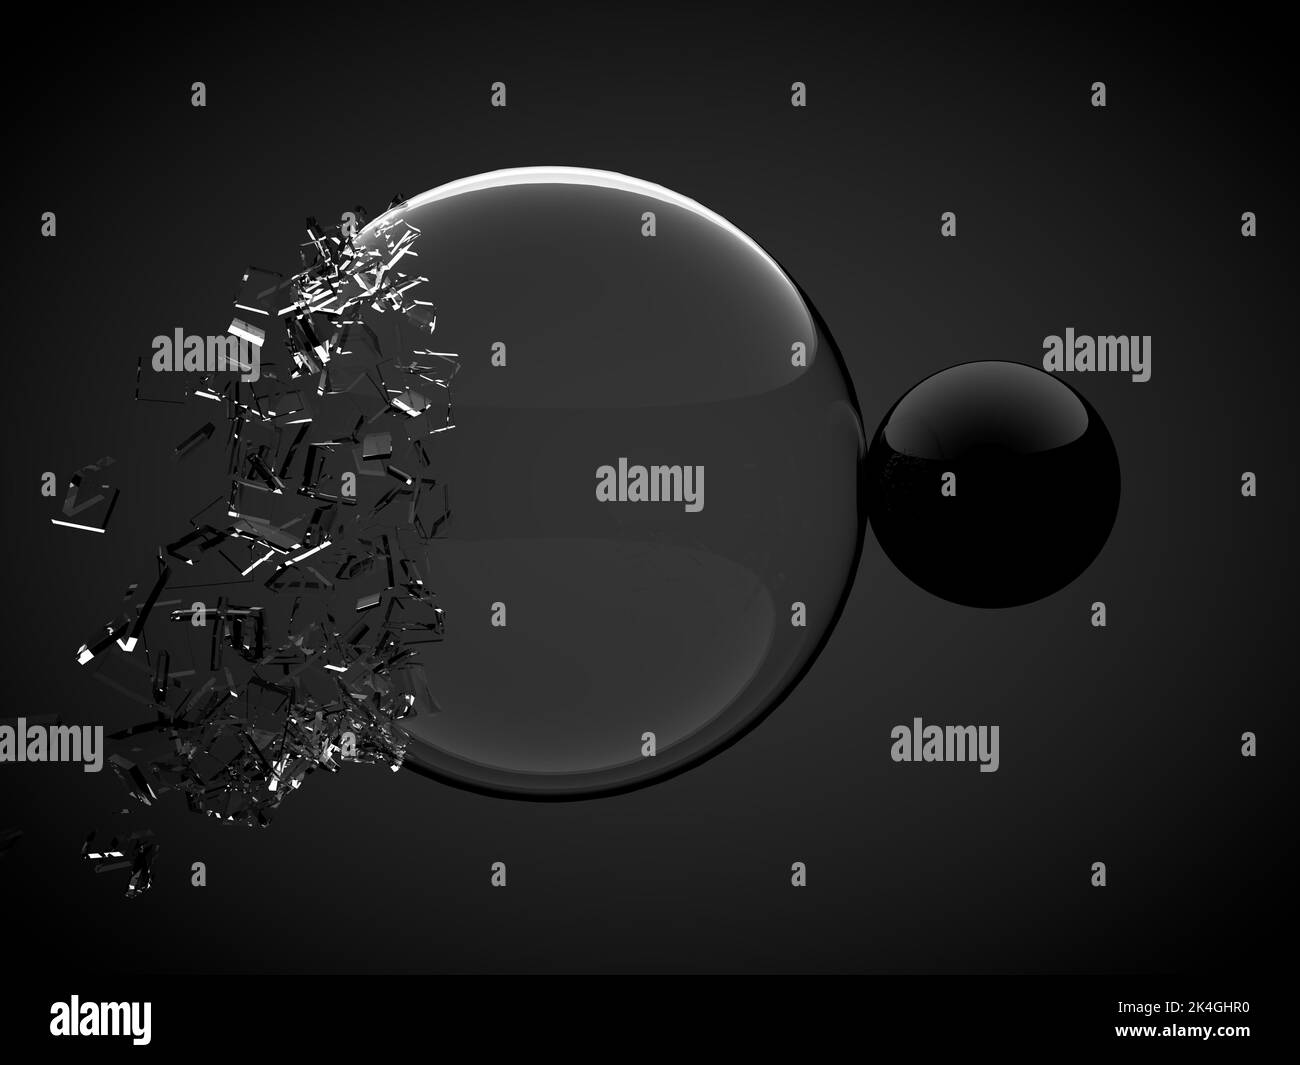 A 3D rendering of two glass balls shattering against a dark gray background Stock Photo